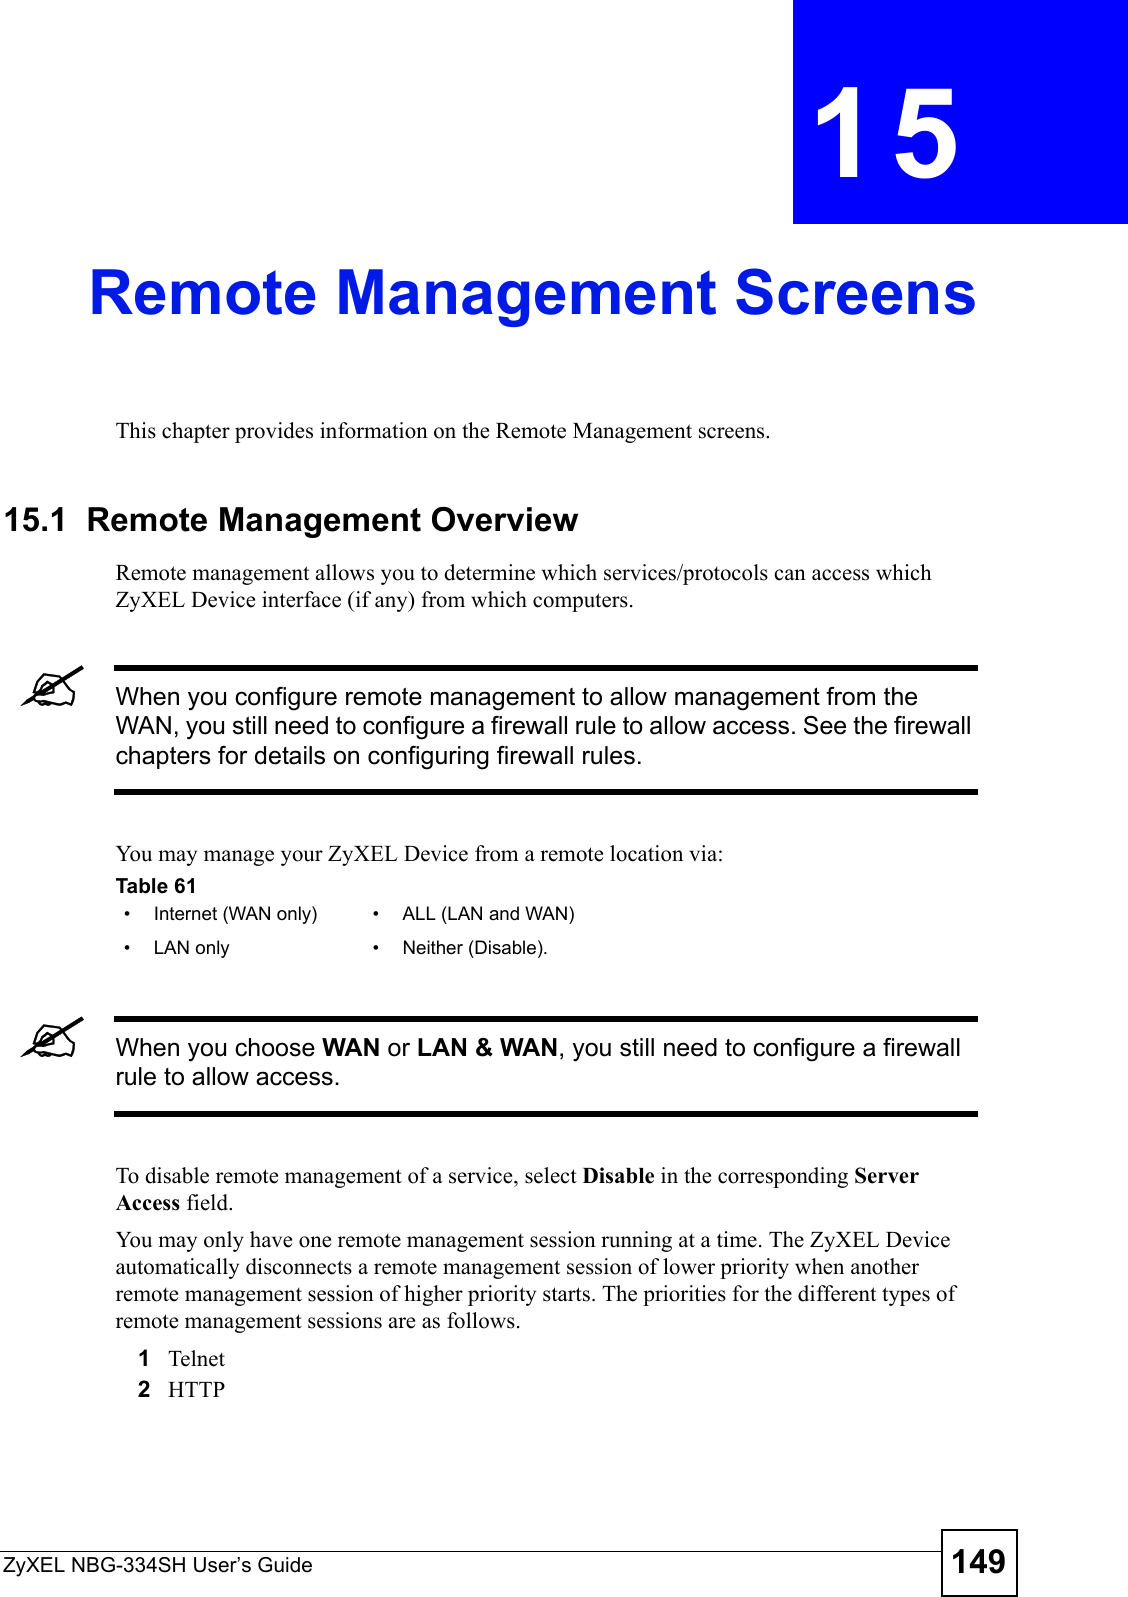 ZyXEL NBG-334SH User’s Guide 149CHAPTER  15 Remote Management ScreensThis chapter provides information on the Remote Management screens. 15.1  Remote Management OverviewRemote management allows you to determine which services/protocols can access which ZyXEL Device interface (if any) from which computers.&quot;When you configure remote management to allow management from the WAN, you still need to configure a firewall rule to allow access. See the firewall chapters for details on configuring firewall rules.You may manage your ZyXEL Device from a remote location via:&quot;When you choose WAN or LAN &amp; WAN, you still need to configure a firewall rule to allow access.To disable remote management of a service, select Disable in the corresponding Server Access field.You may only have one remote management session running at a time. The ZyXEL Device automatically disconnects a remote management session of lower priority when another remote management session of higher priority starts. The priorities for the different types of remote management sessions are as follows.1Telnet2HTTPTable 61   • Internet (WAN only) • ALL (LAN and WAN)• LAN only • Neither (Disable).